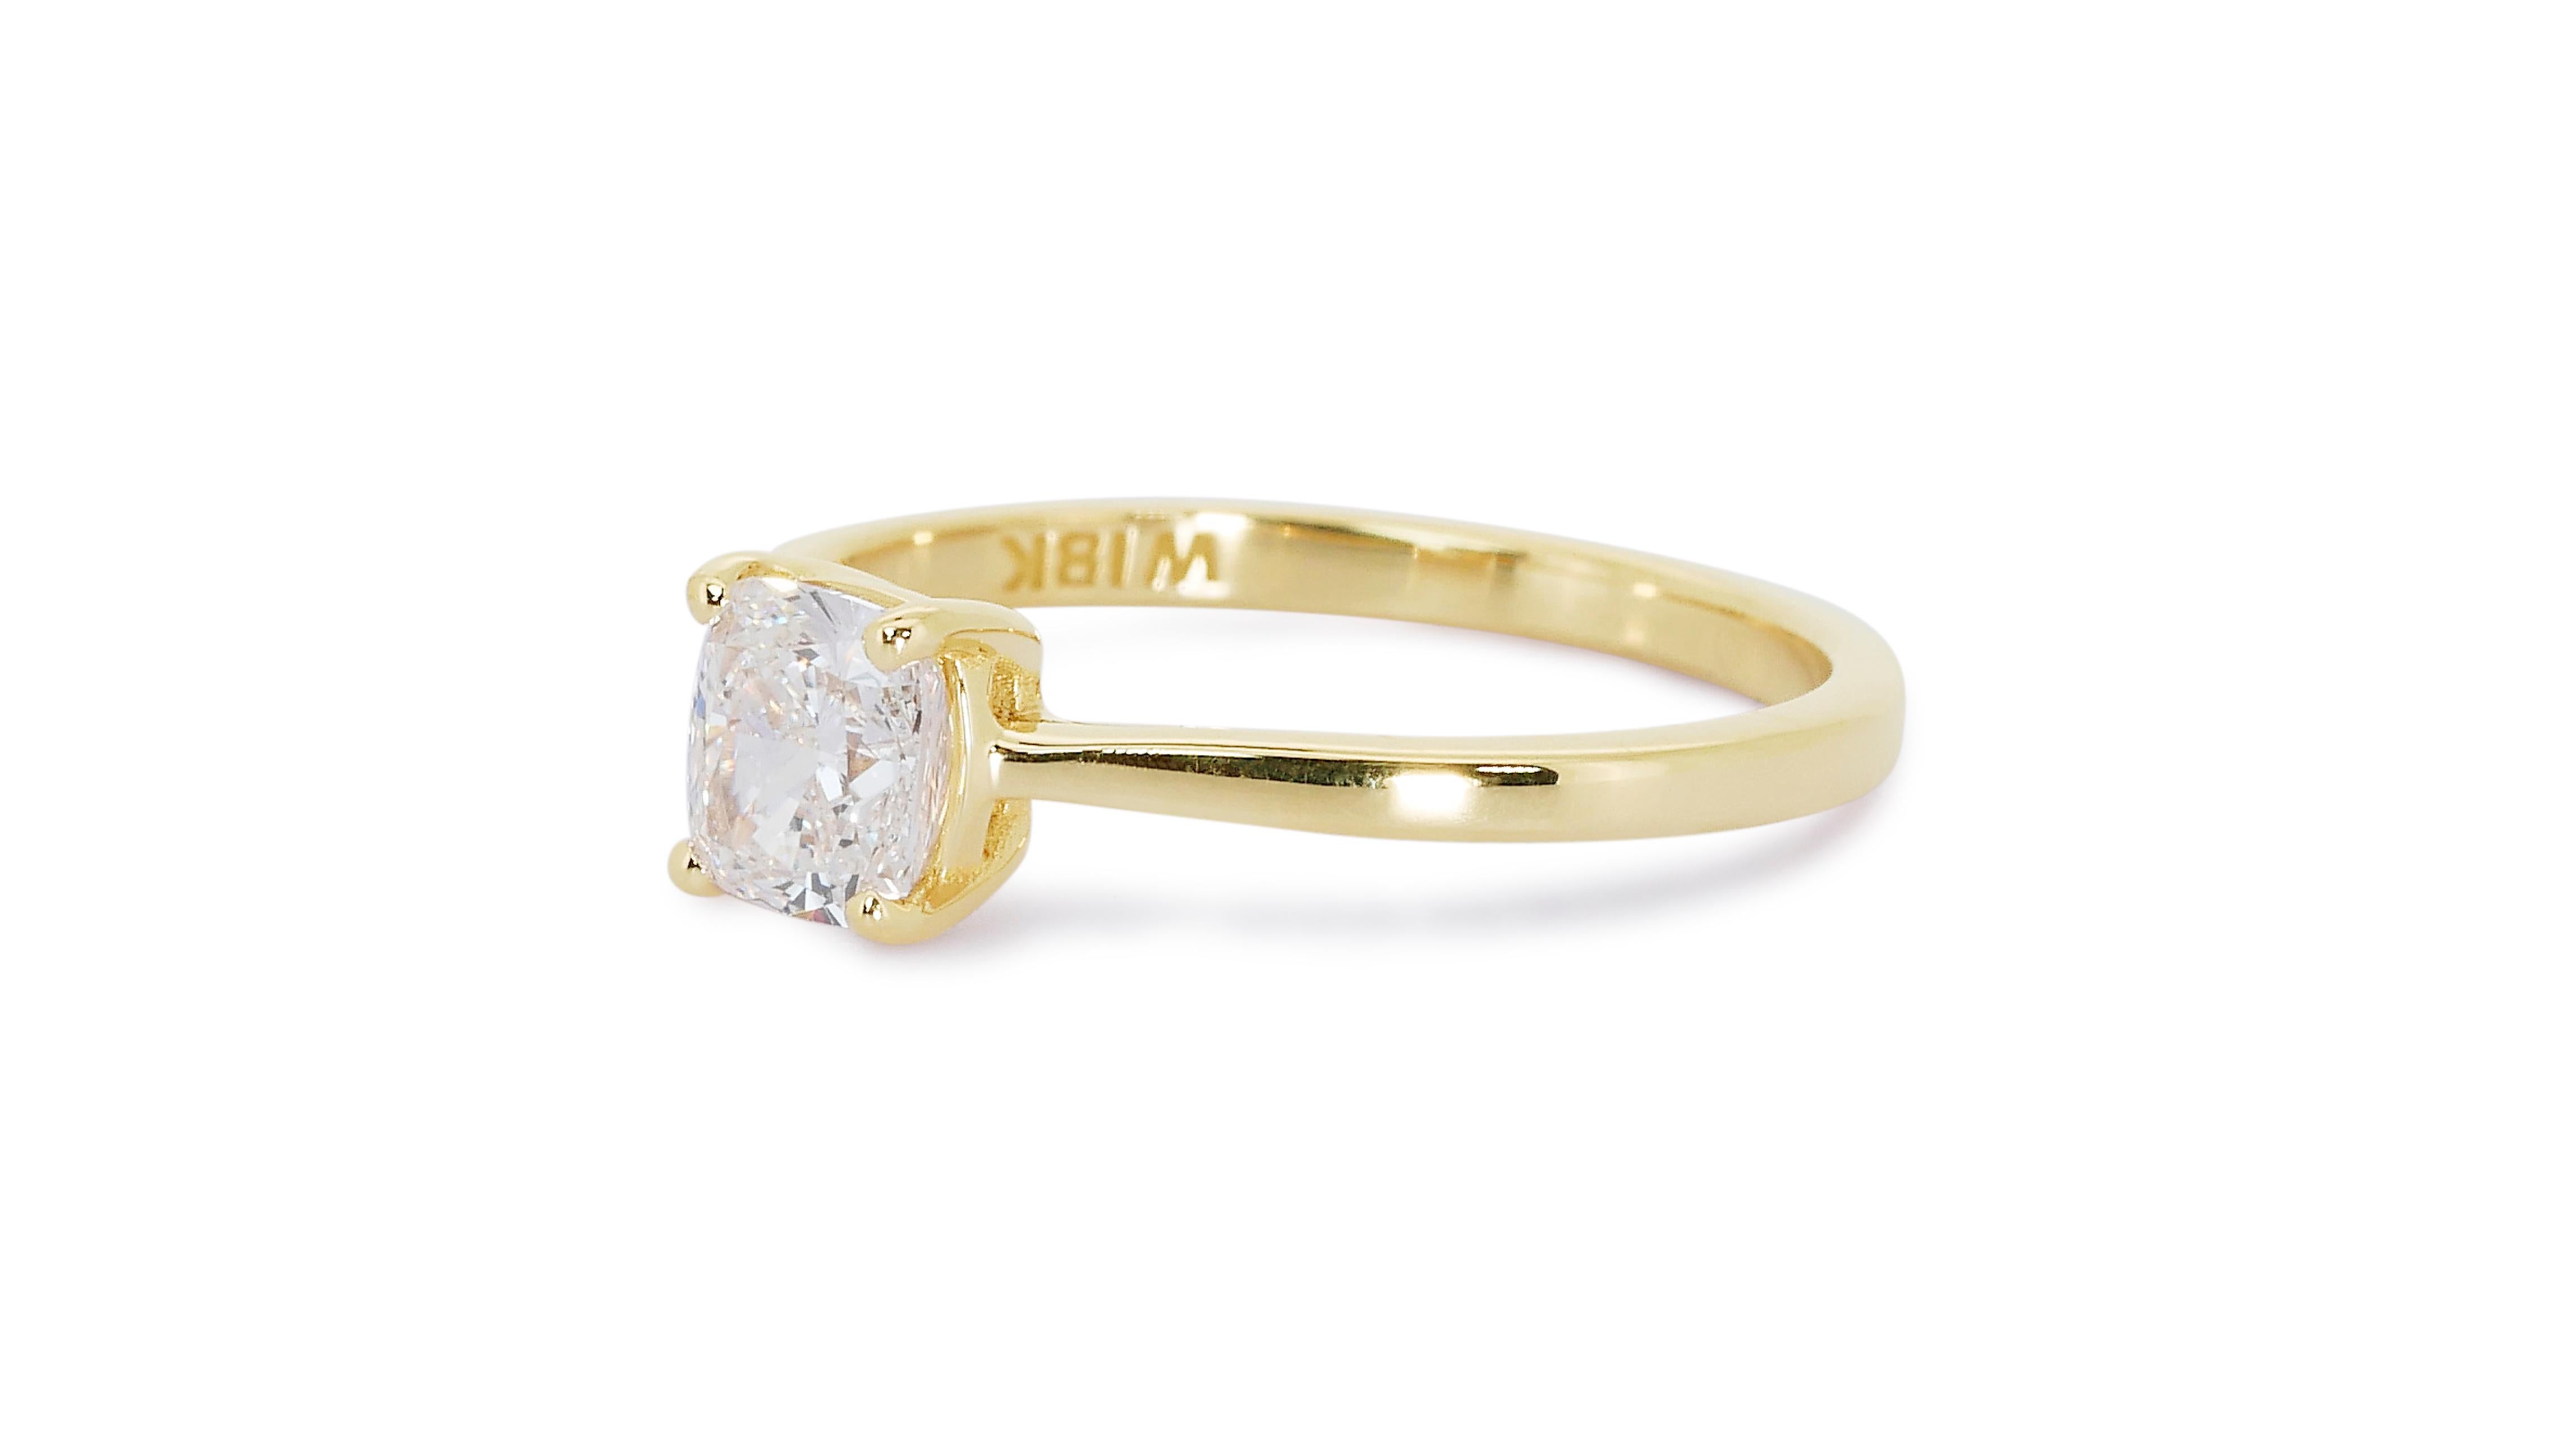 Glamorous 18k Yellow Gold Solitaire Ring w/ 0.80 ct Natural Diamonds IGI Cert In New Condition For Sale In רמת גן, IL